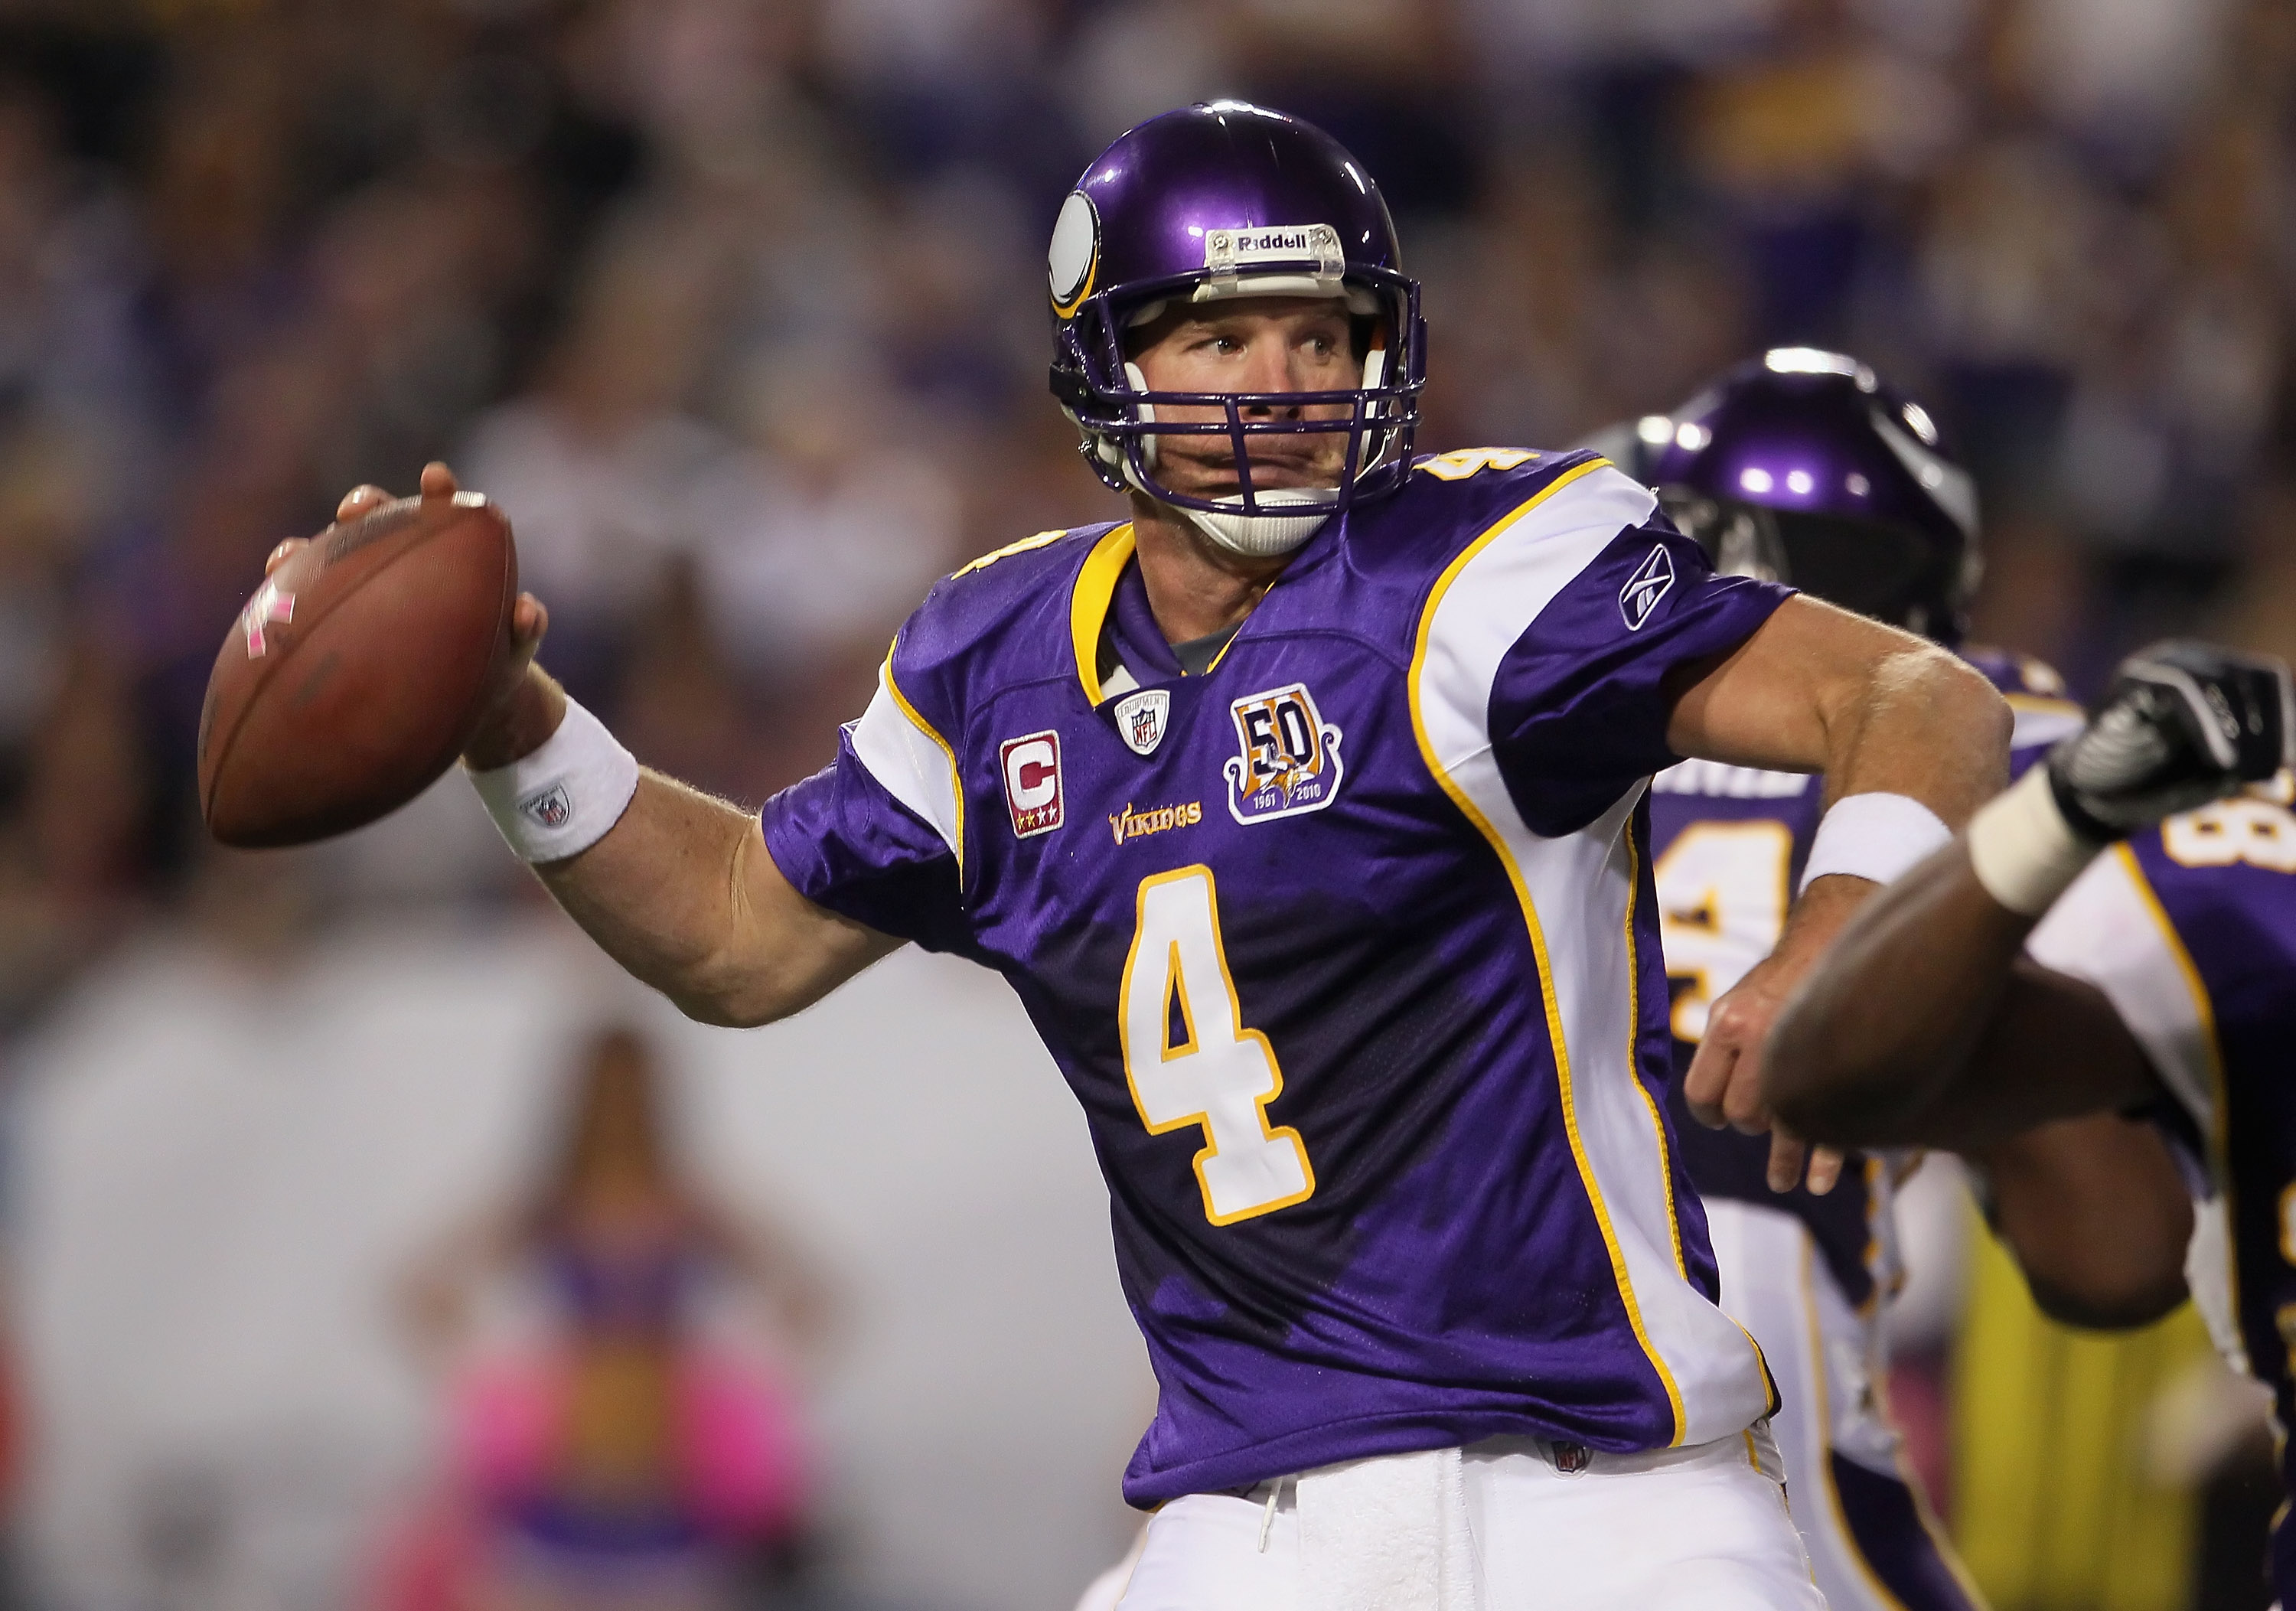 MINNEAPOLIS - OCTOBER 17:  Quarterback Brett Favre #4 of the Minnesota Vikings drops back to pass during the fourth quarter against the Dallas Cowboys at Mall of America Field on October 17, 2010 in Minneapolis, Minnesota. The Vikings defeated the Cowboys